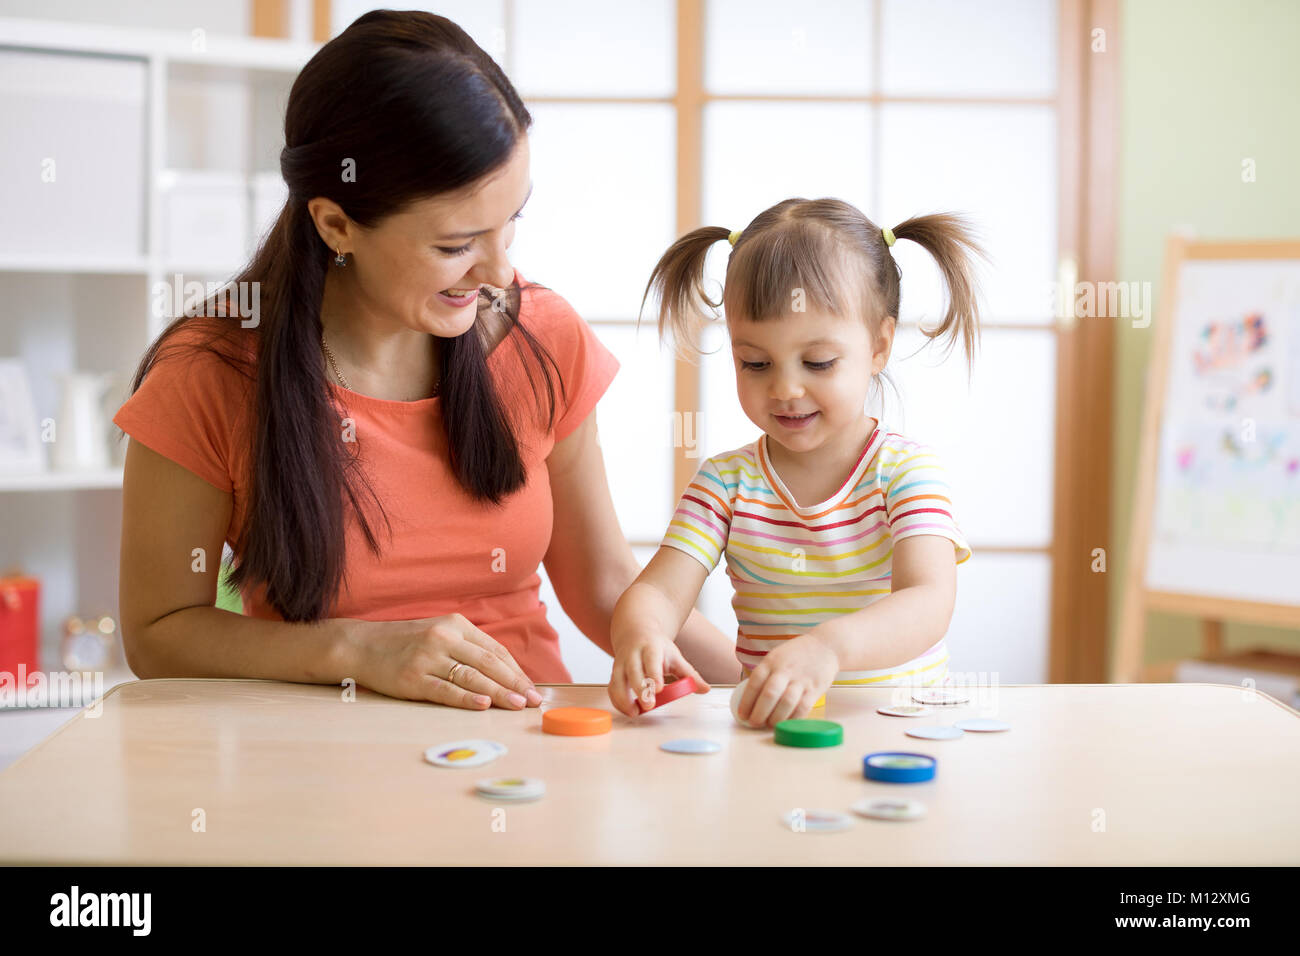 Mom with creative child having fun time together Stock Photo